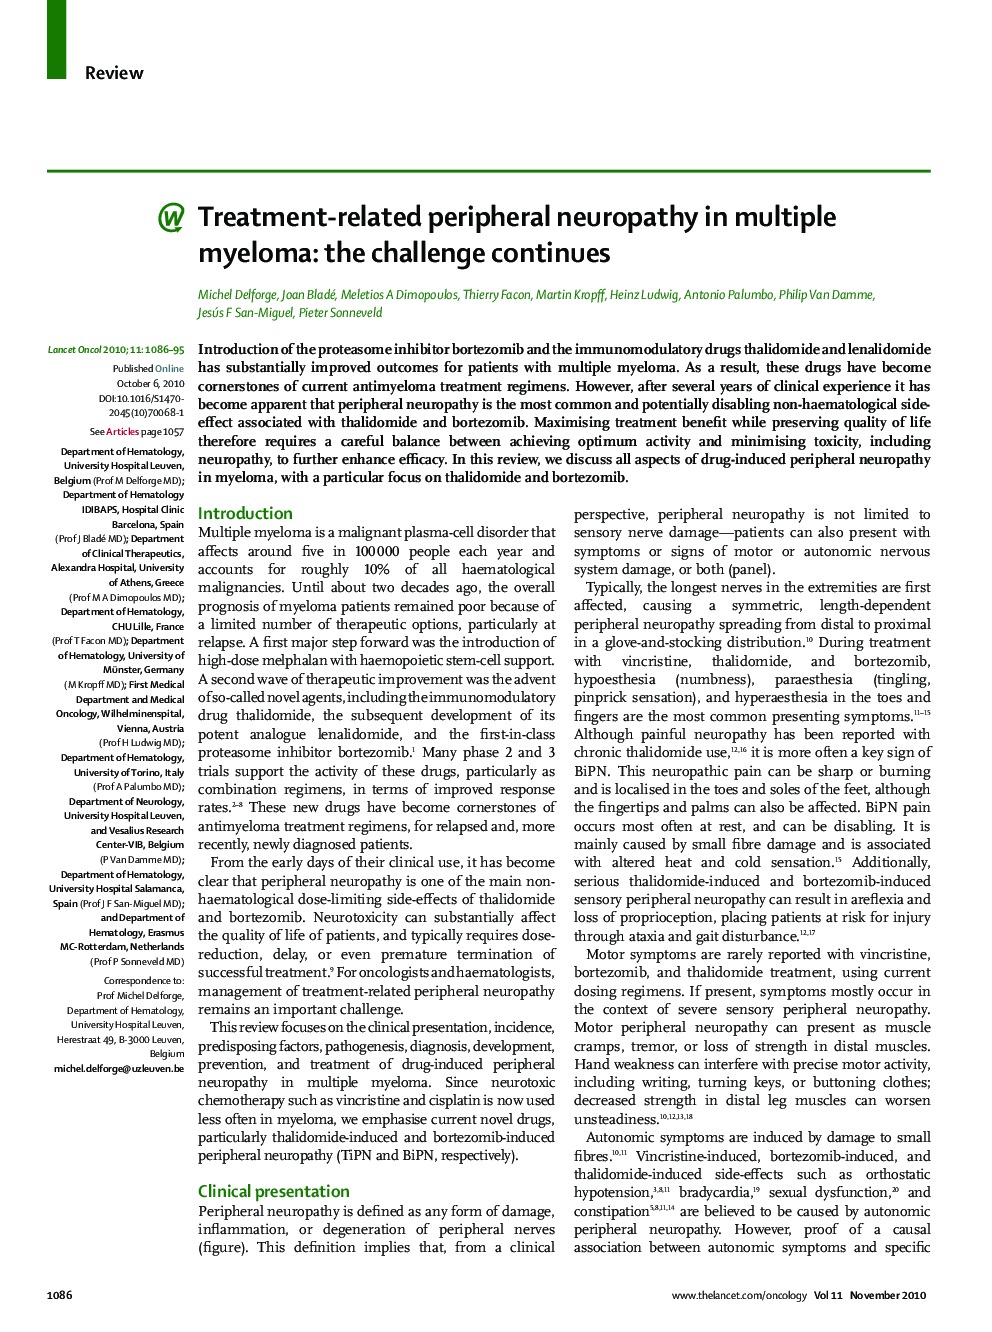 Treatment-related peripheral neuropathy in multiple myeloma: the challenge continues